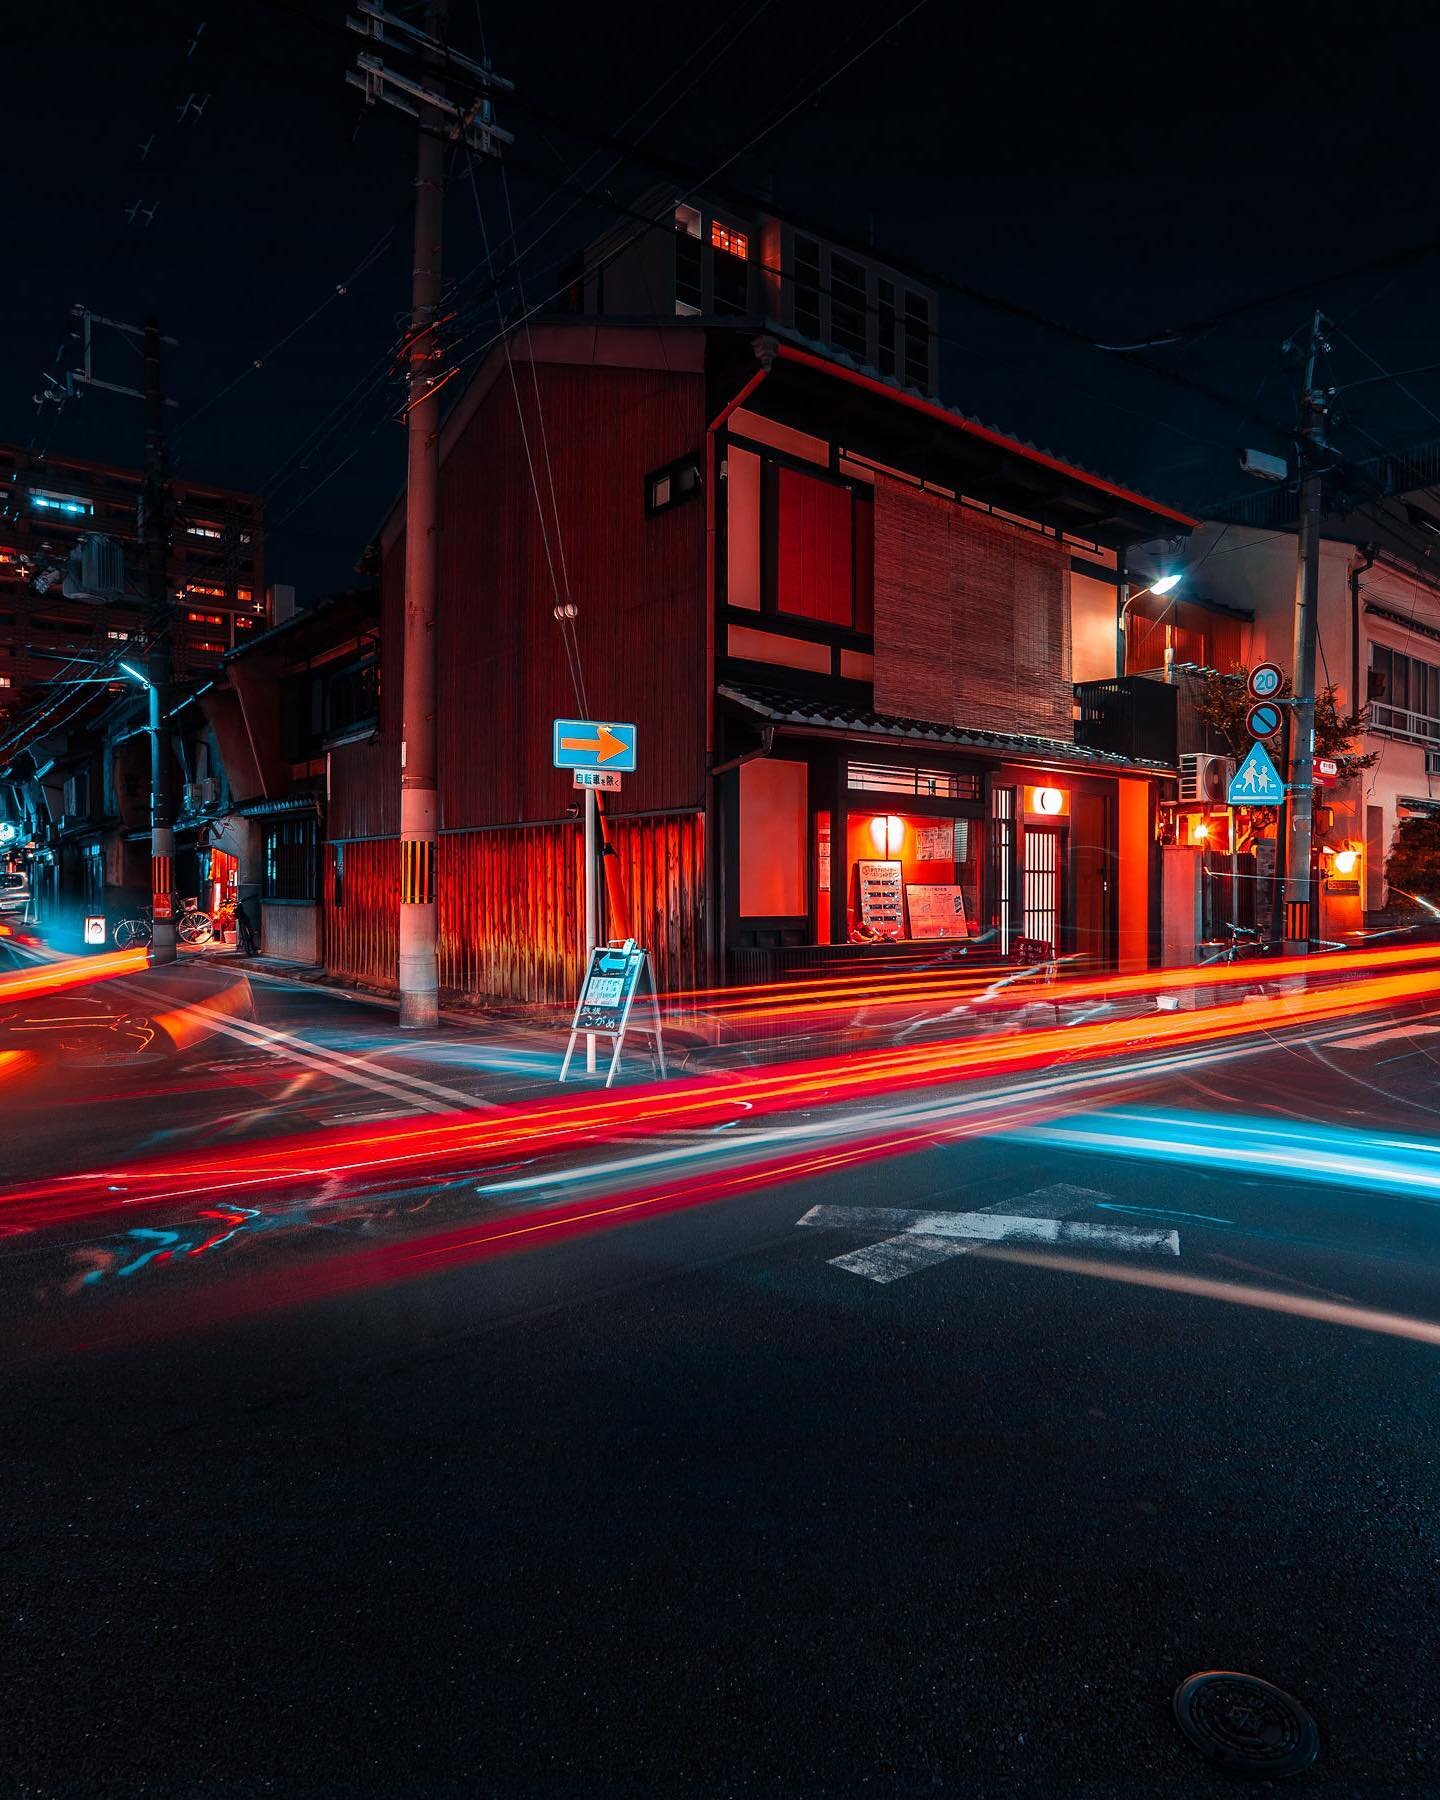 Kyoto, Japan.
Urban choreography.
Currently the city I miss the most since covid. I can&rsquo;t wait to go back there, it&rsquo;s one of those places where you will feel home even if you are very far from it. 
It took me a couple of years to get it d